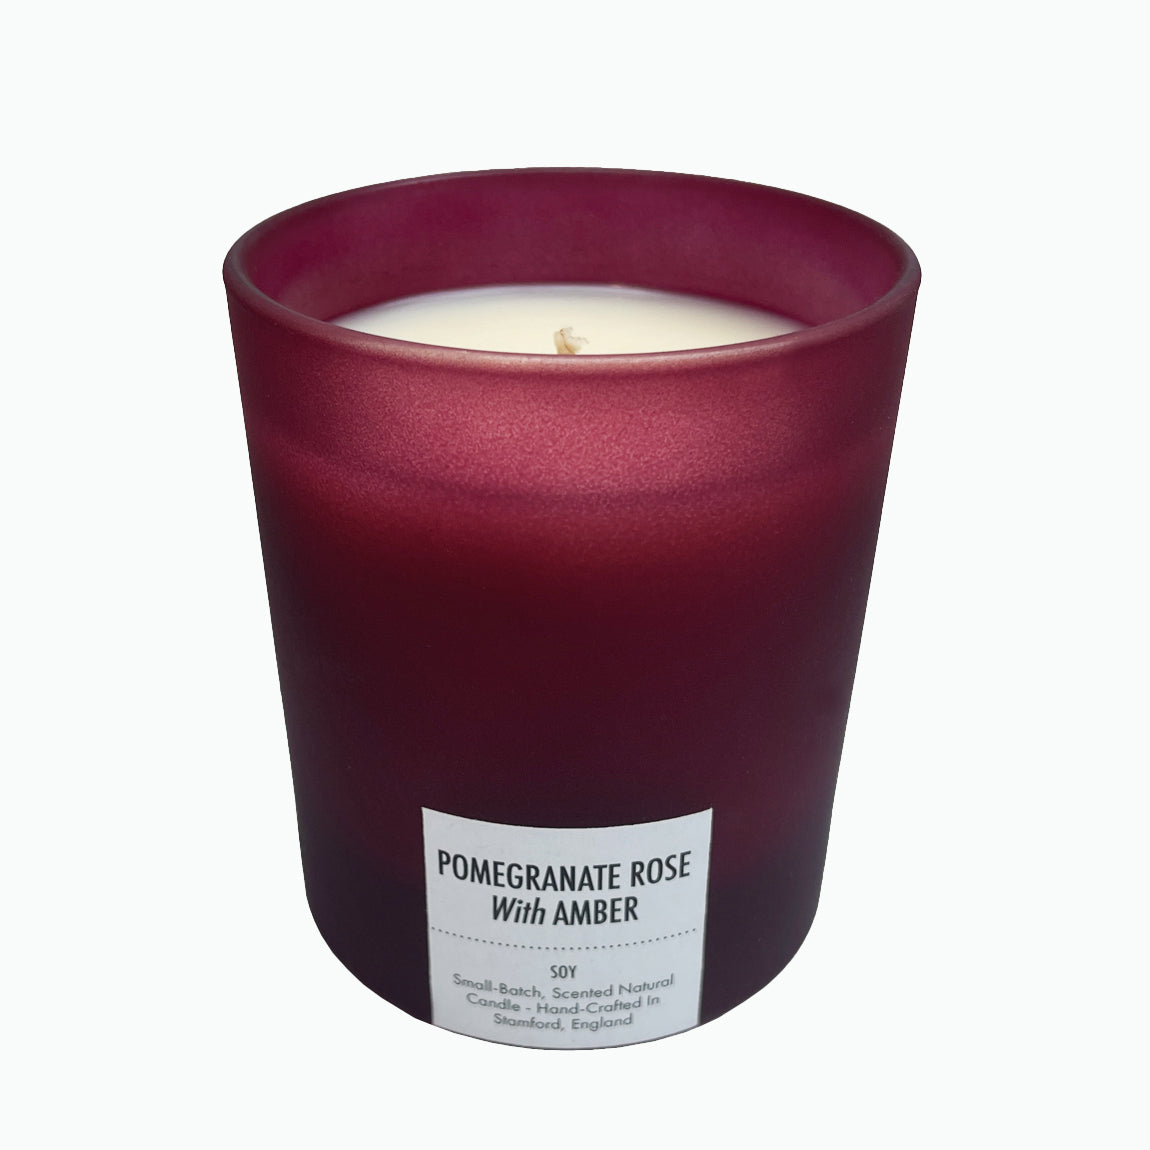 Pomegranate Rose With Amber - Scented Soy Candle